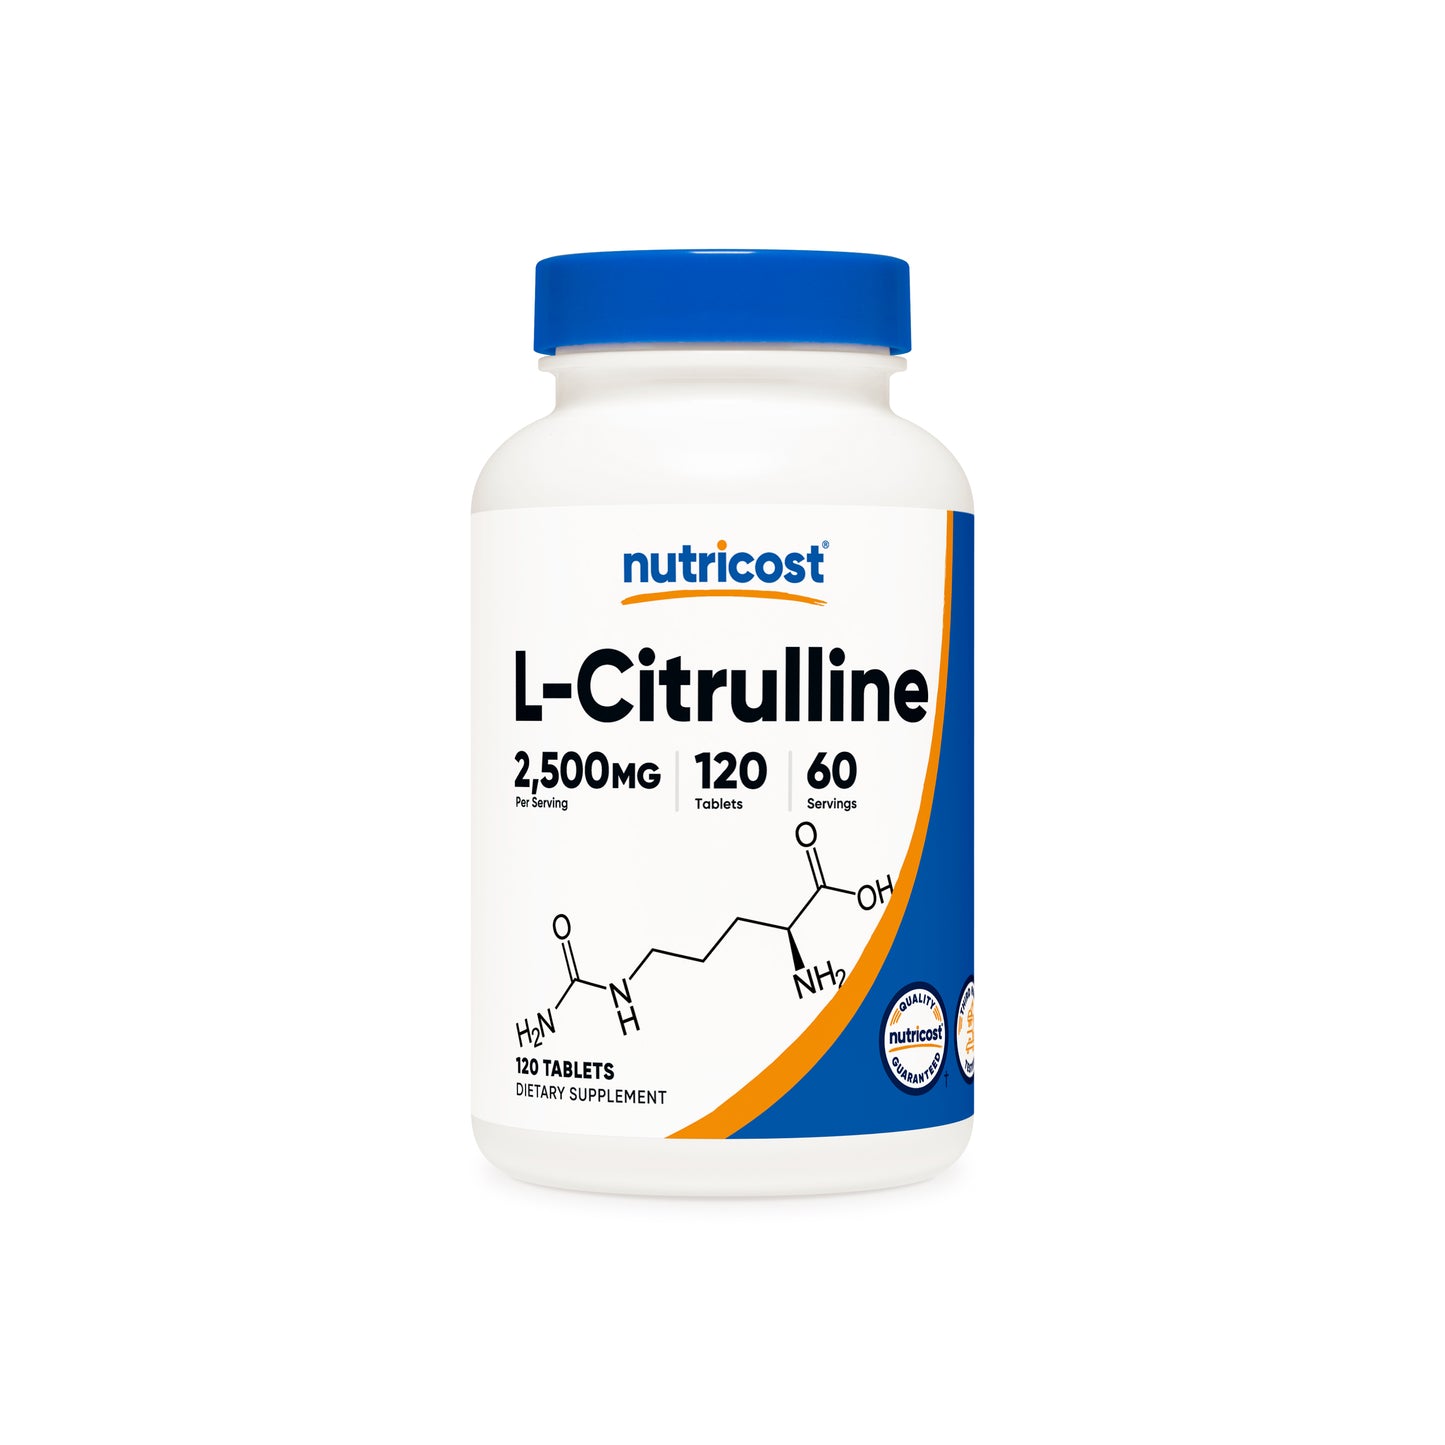 Nutricost L-Citrulline Tablets